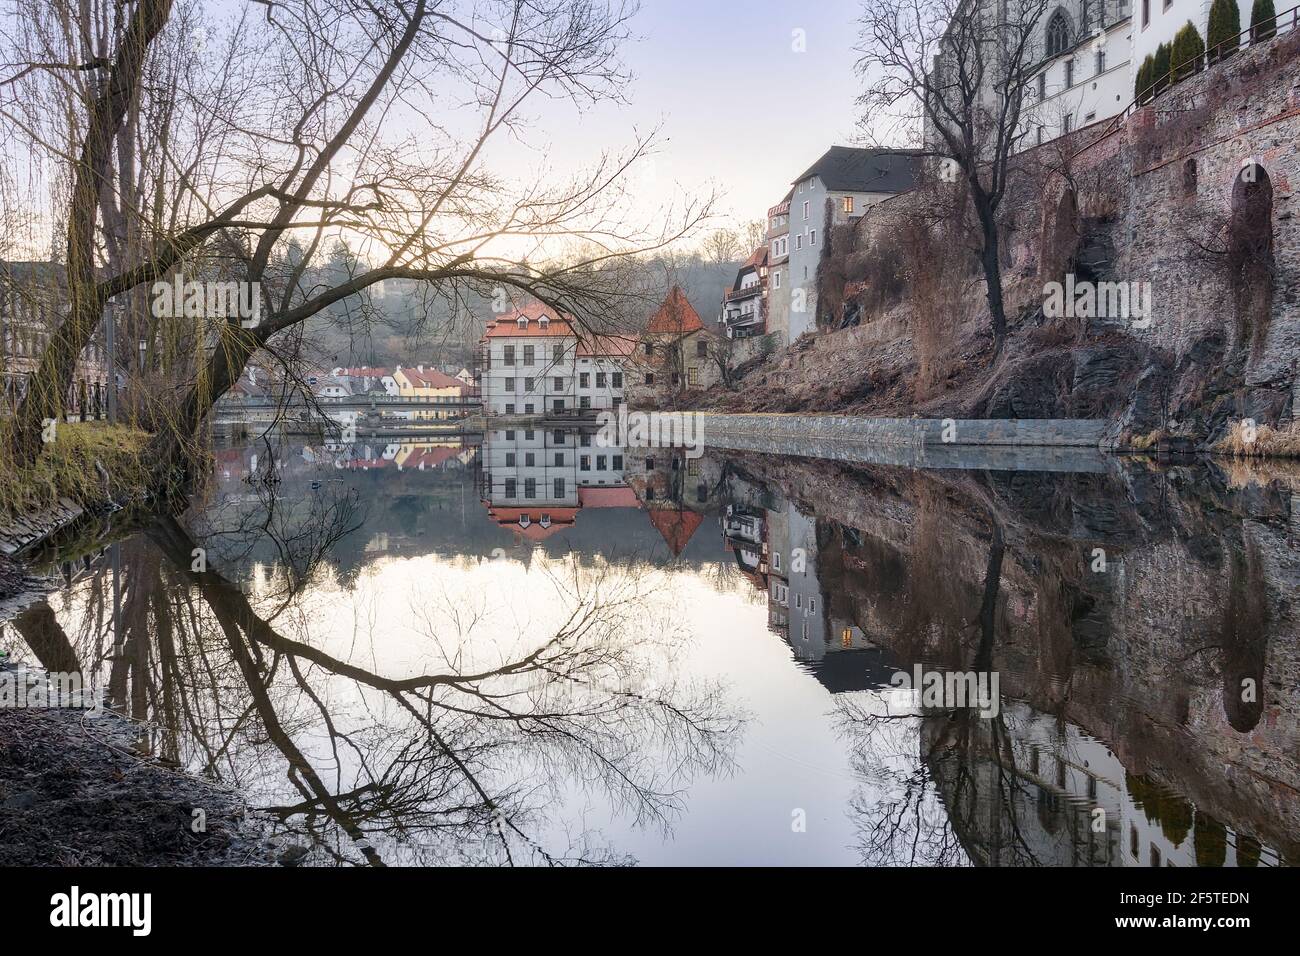 Picturesque view of aged shabby residential buildings reflecting in calm water of river Stock Photo